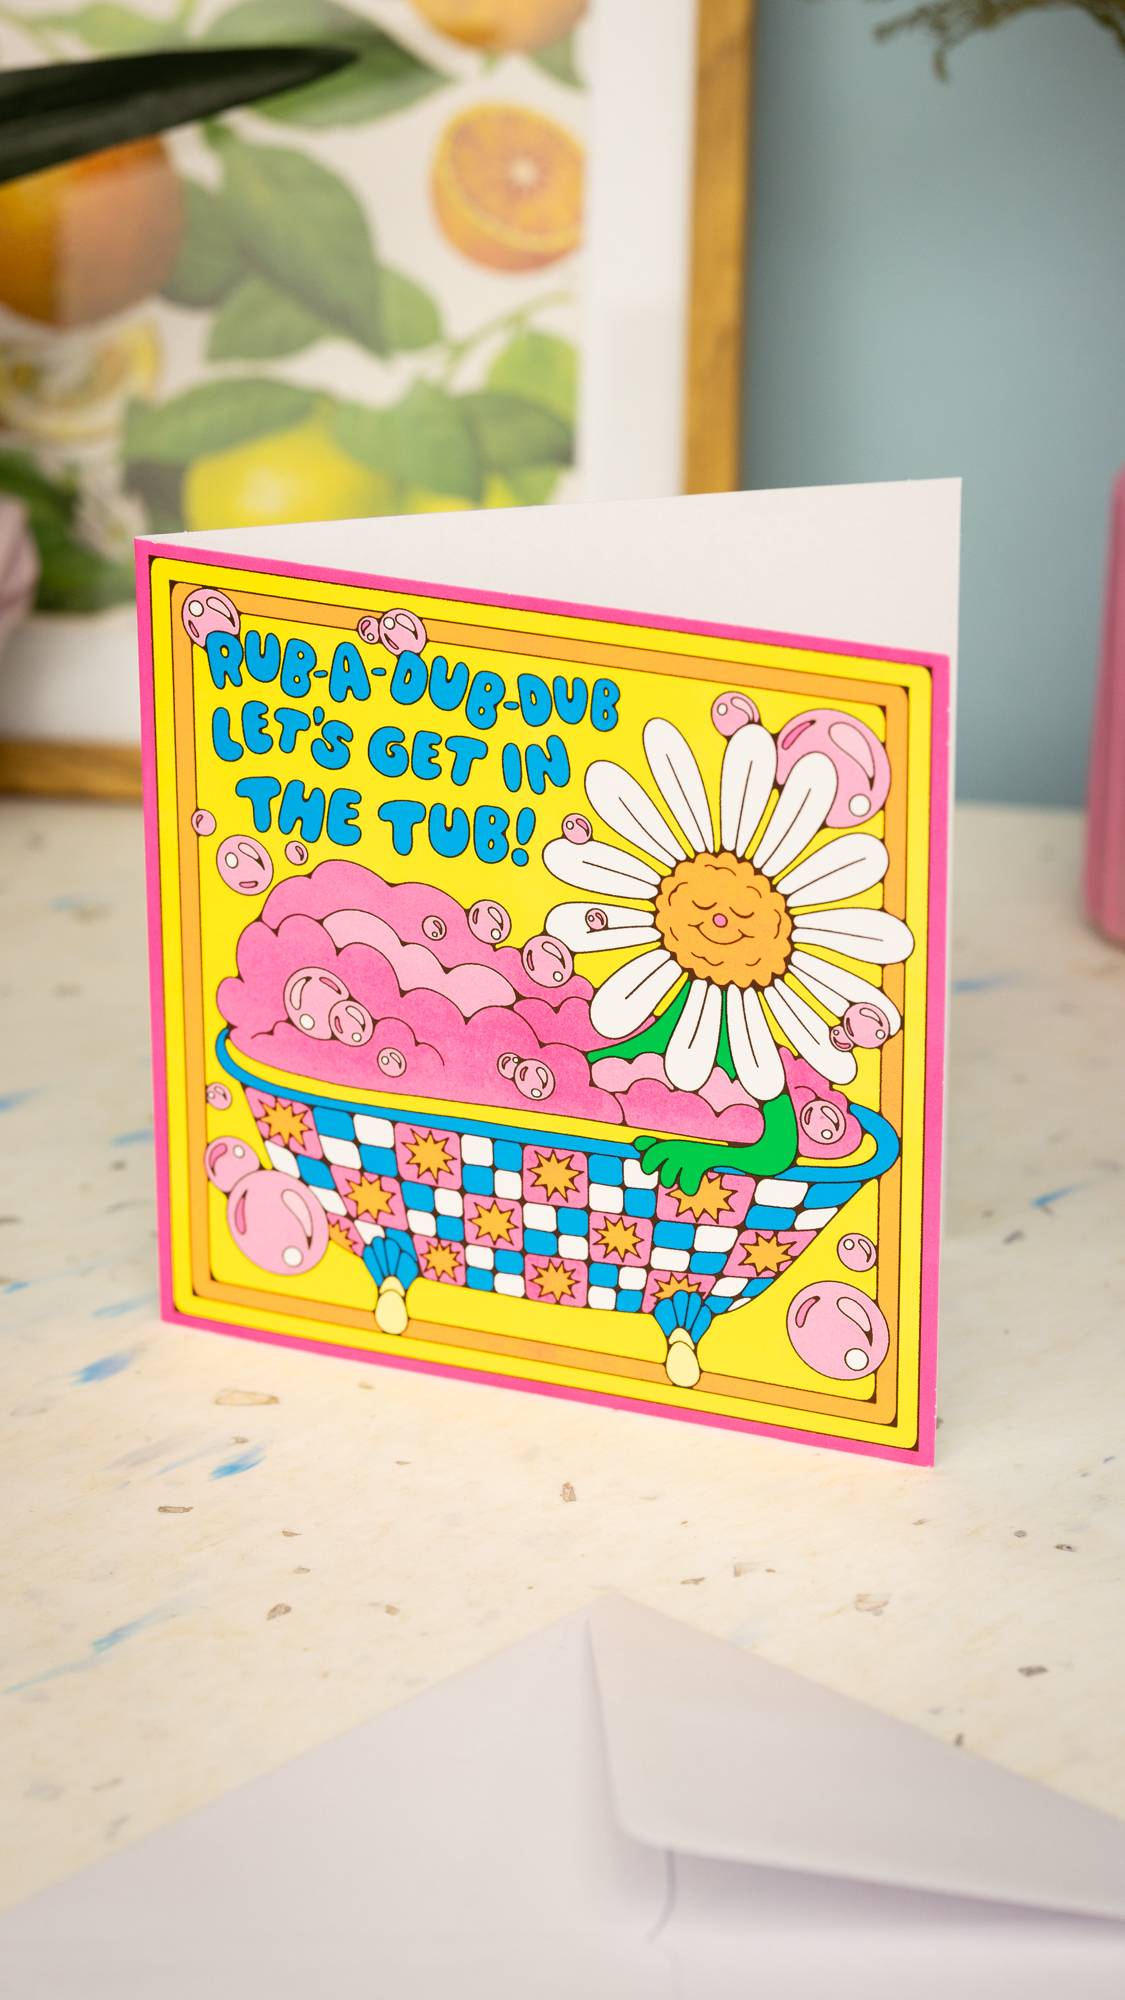 Image shows the Rub-A-Dub-Dub Let's Get In The Tub greetings card stood on a table, having just been opened.